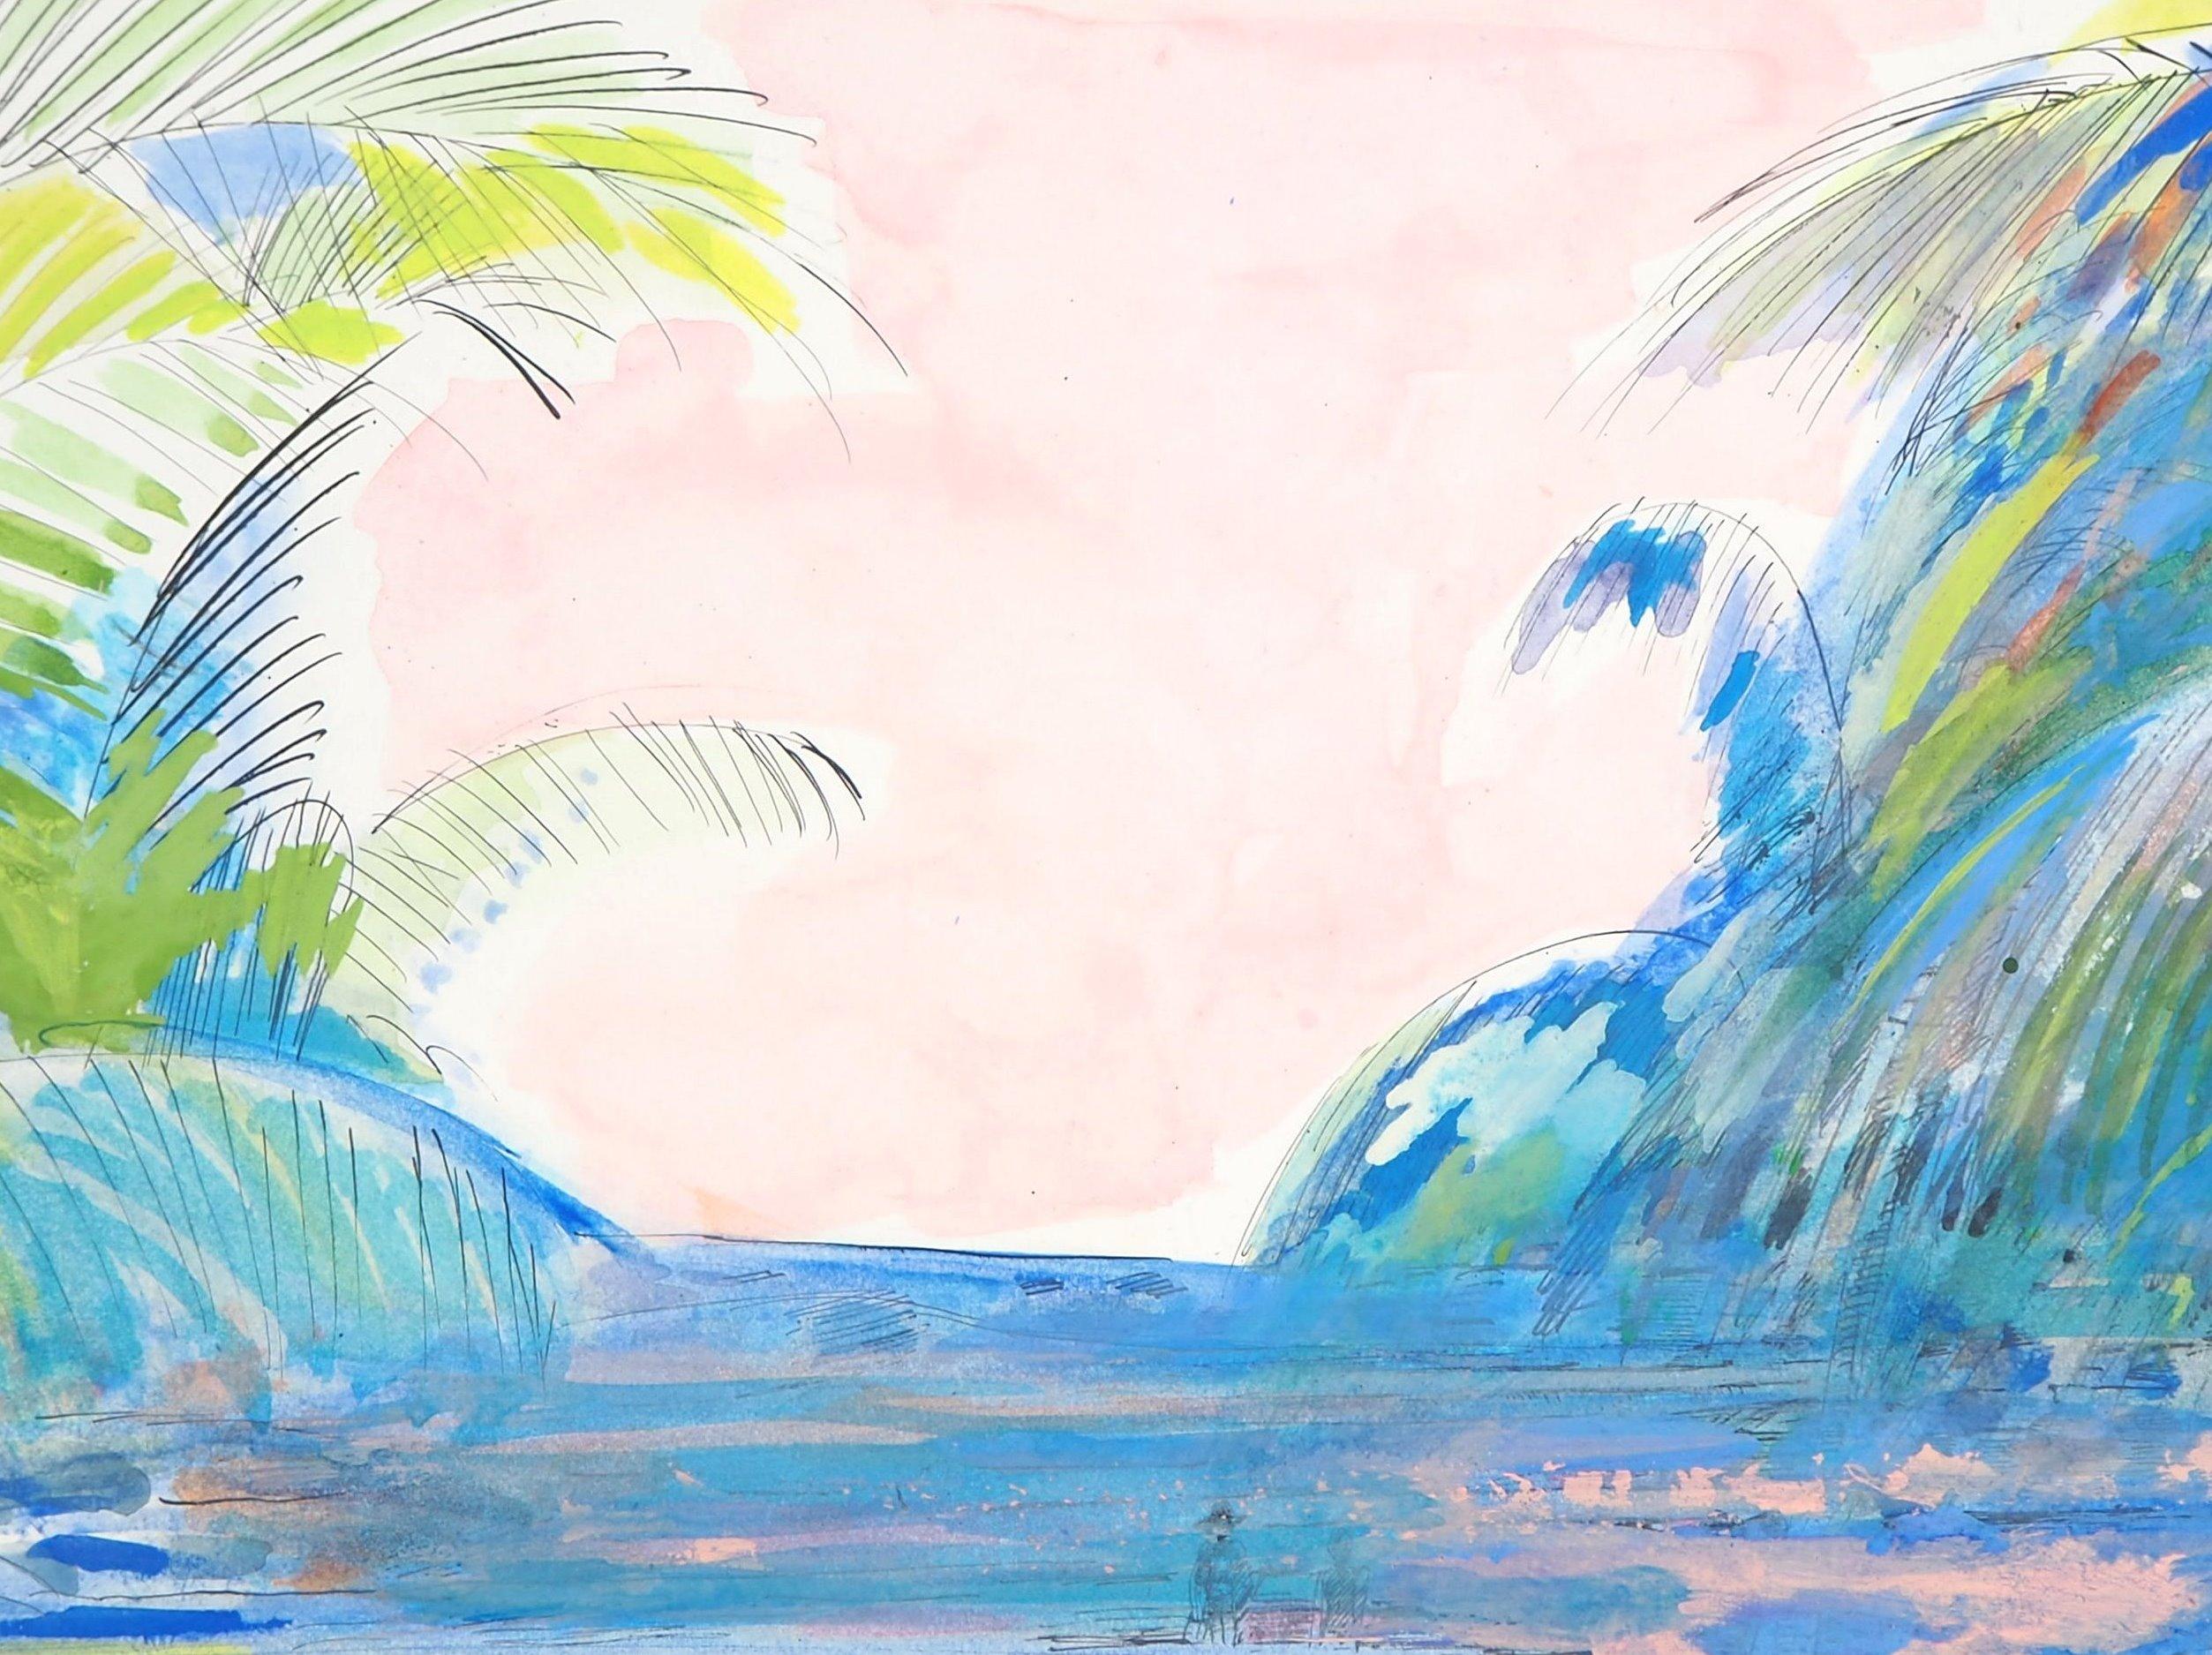 Pink Sky on the Beach - Original Handsigned Watercolor, Gouache and Ink Painting - Impressionist Art by Maurice Genis